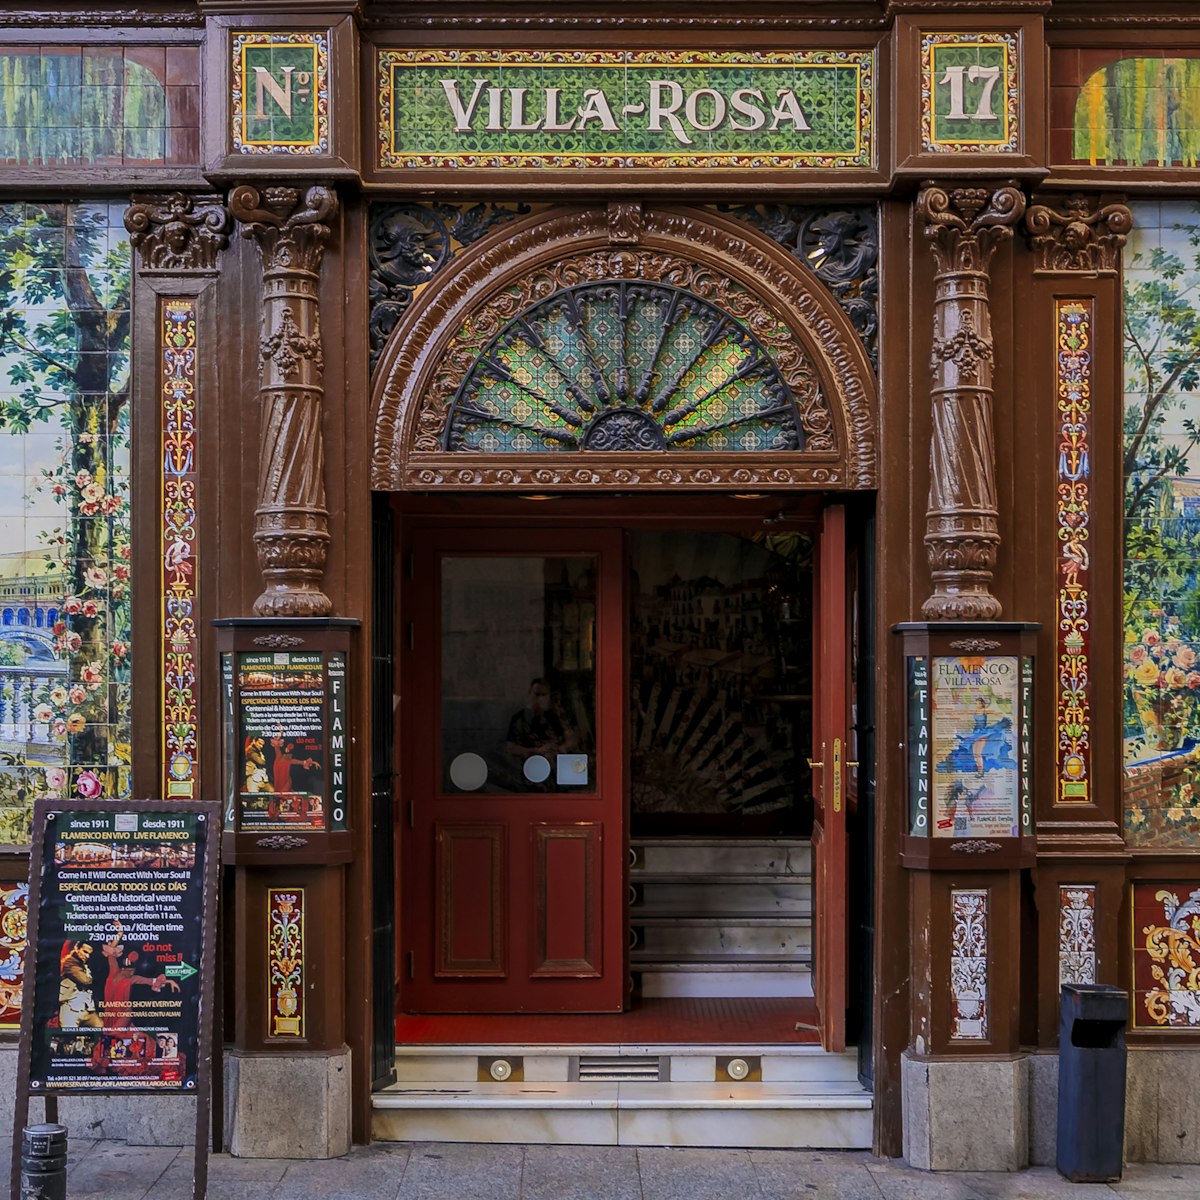 Details of an ornate retro mosaic facade of the restaurant called Villa Rosa famous for flamenco performance in Madrid, Spain